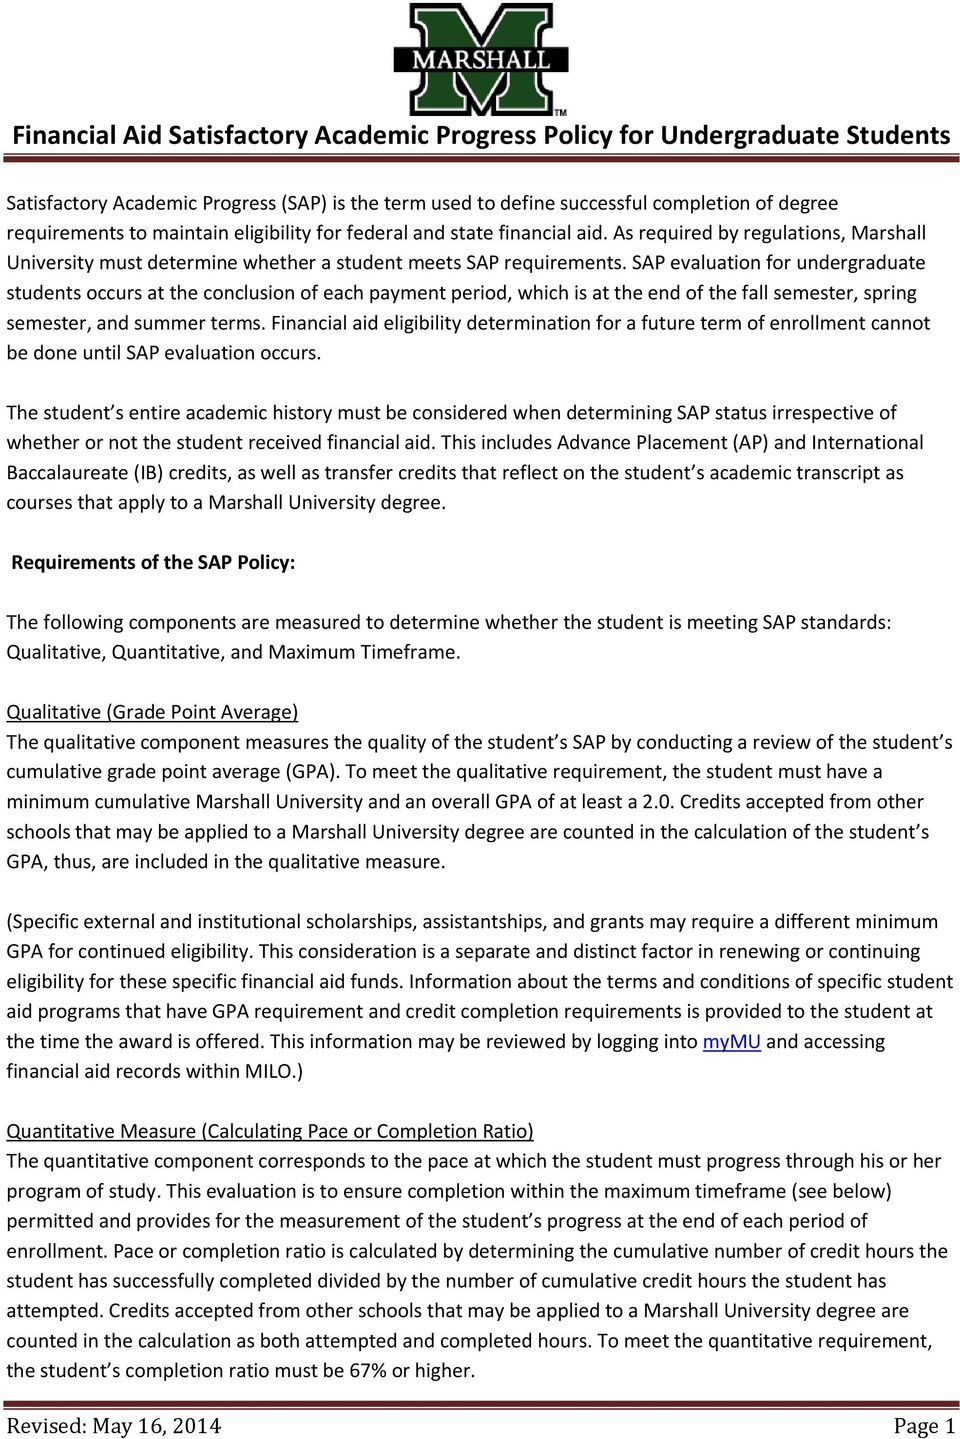 SAP evaluation for undergraduate students occurs at the conclusion of each payment period, which is at the end of the fall semester, spring semester, and summer terms.